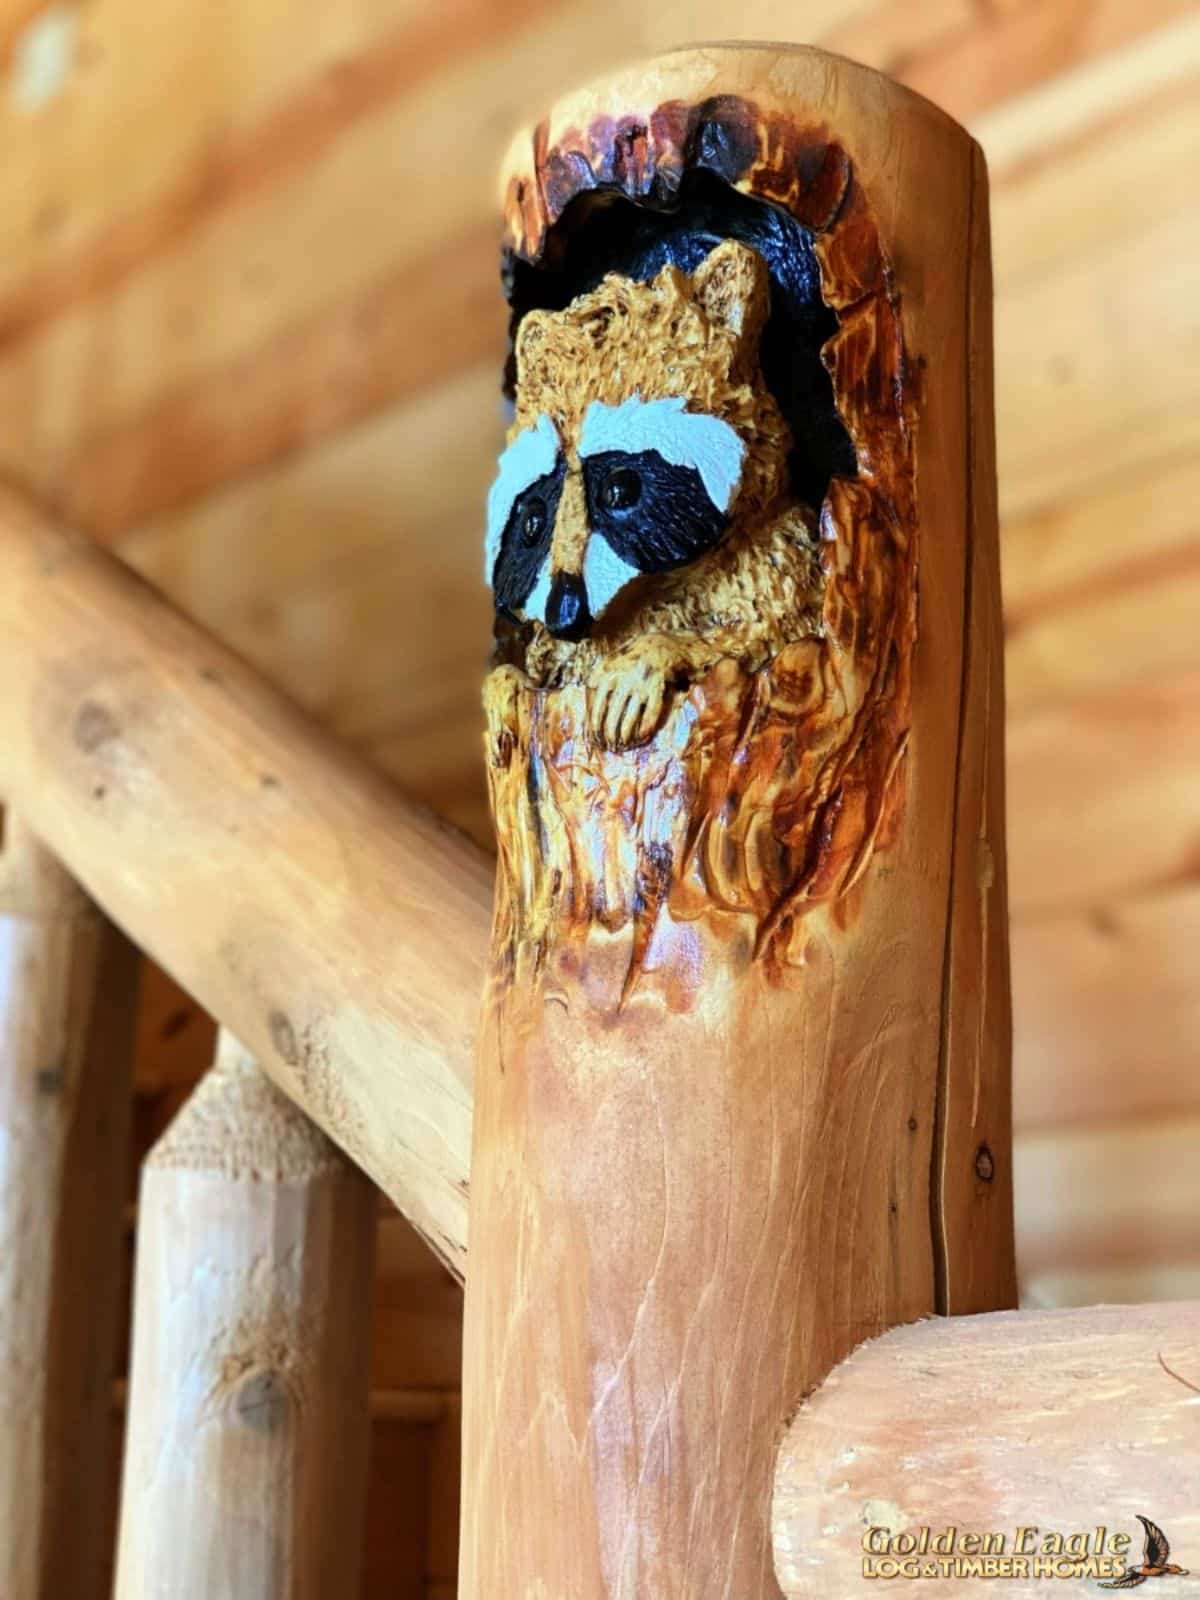 raccoon carved into wooden beam n staircase